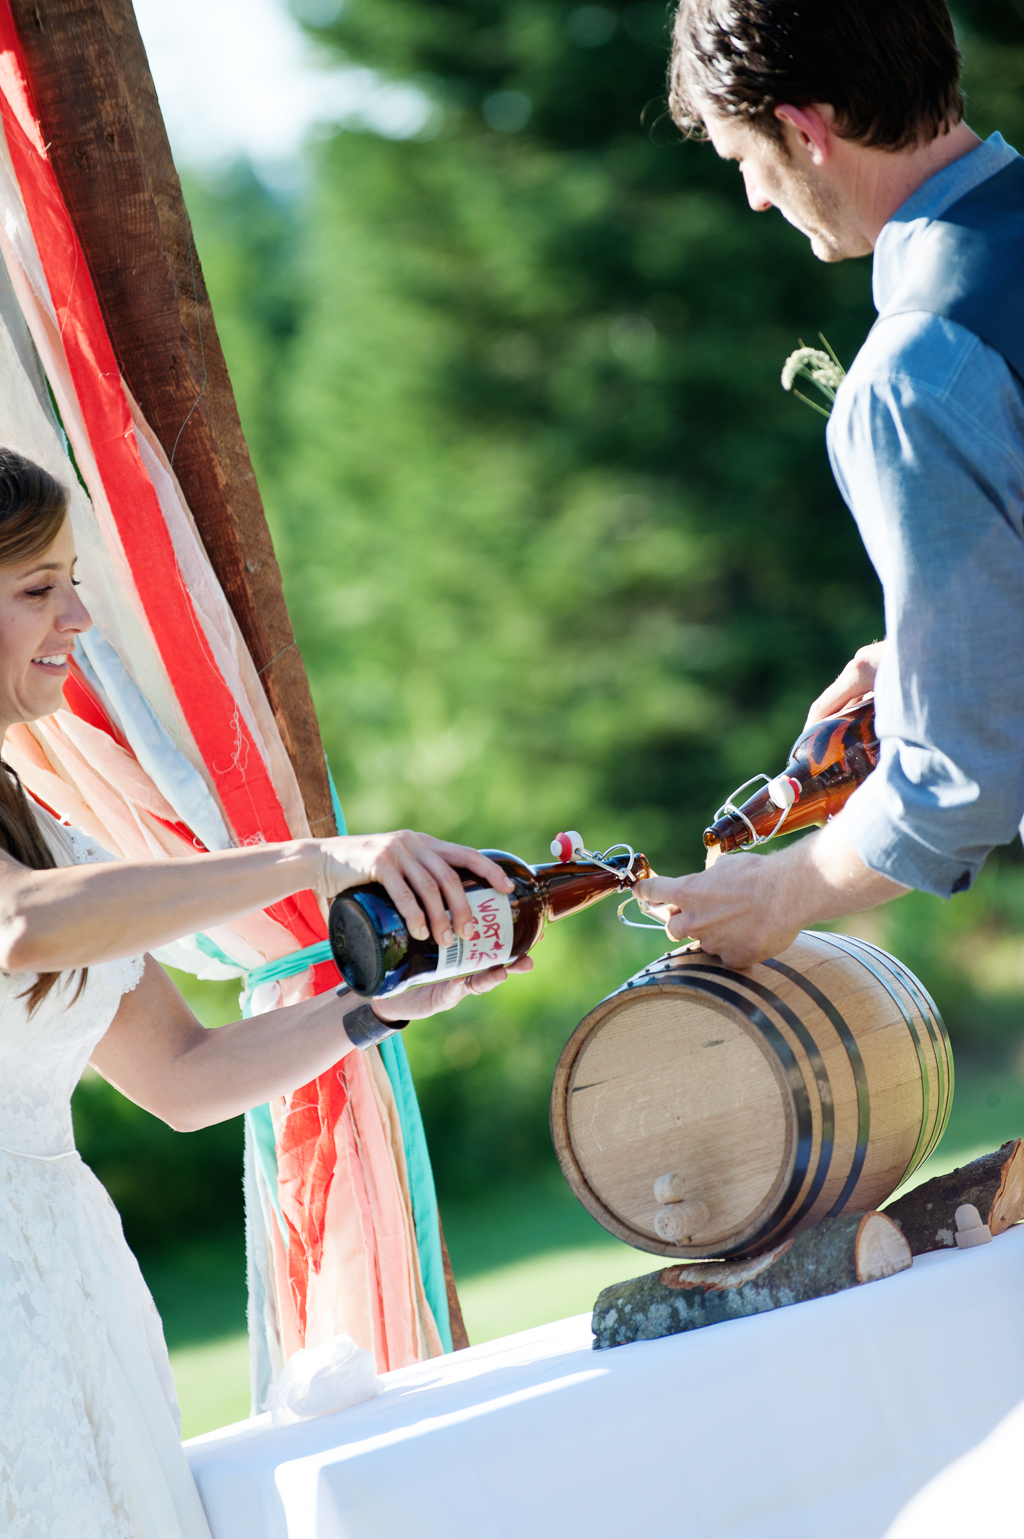 the bride and groom pour bottles of alcohol into a barrel during the wedding ceremony